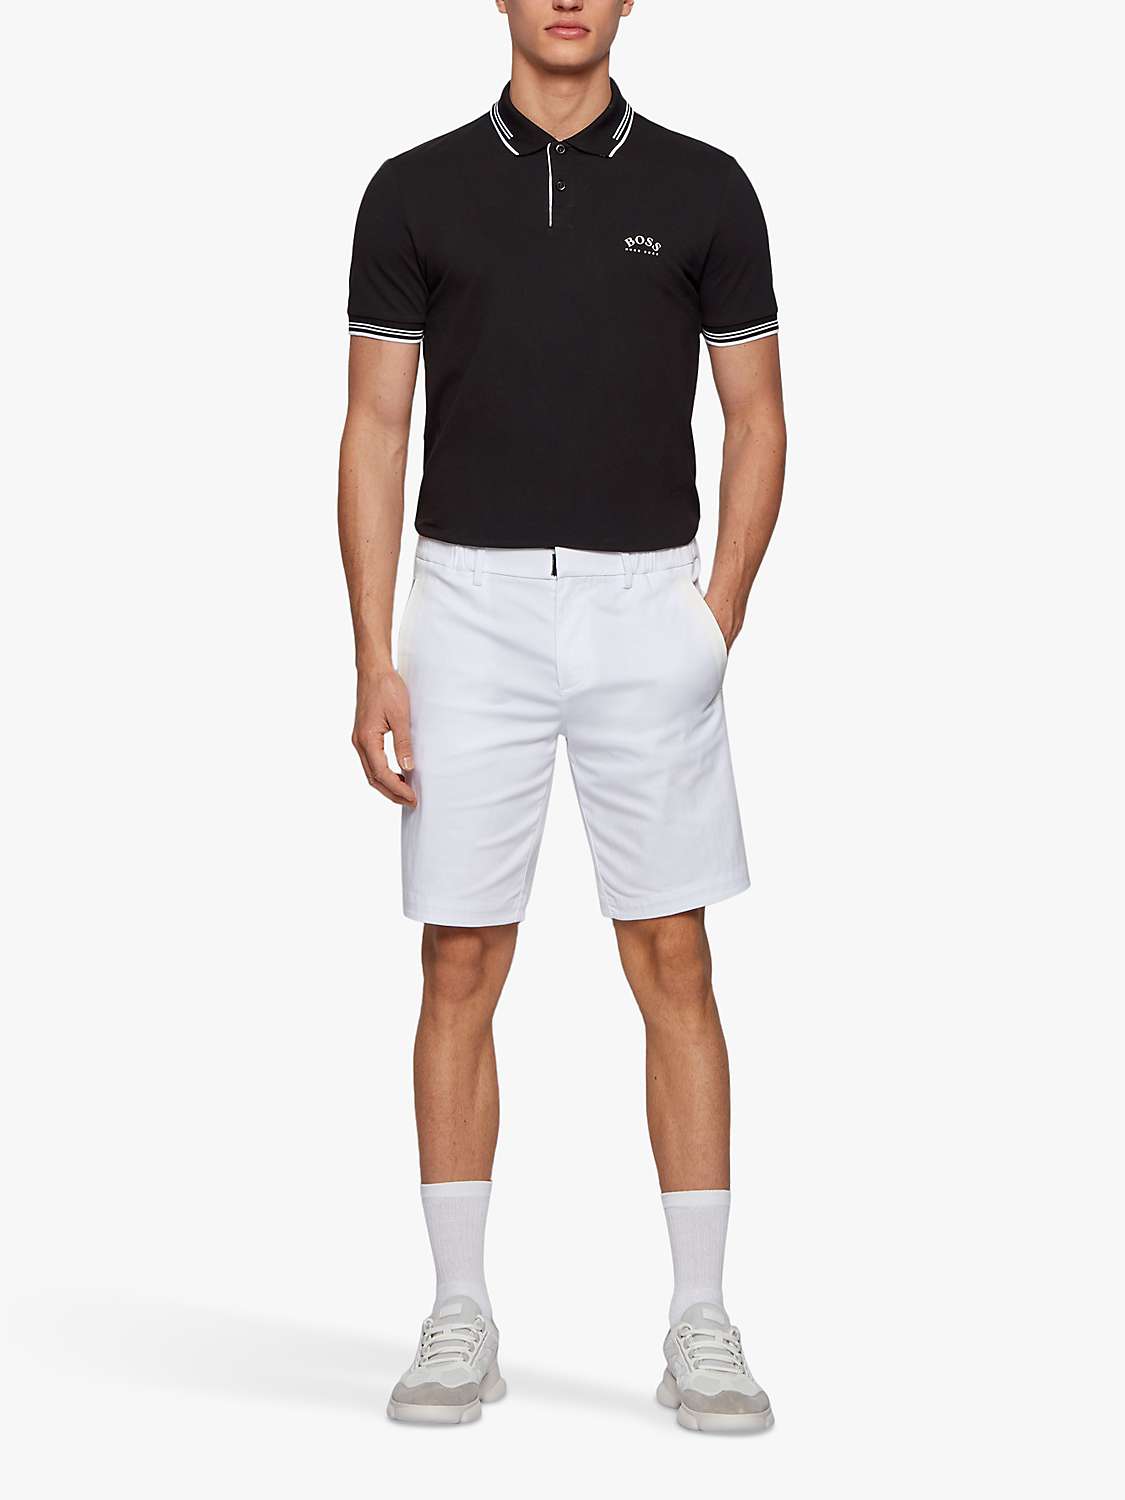 Buy BOSS Paul Curve Short Sleeve Polo Shirt, Charcoal Online at johnlewis.com